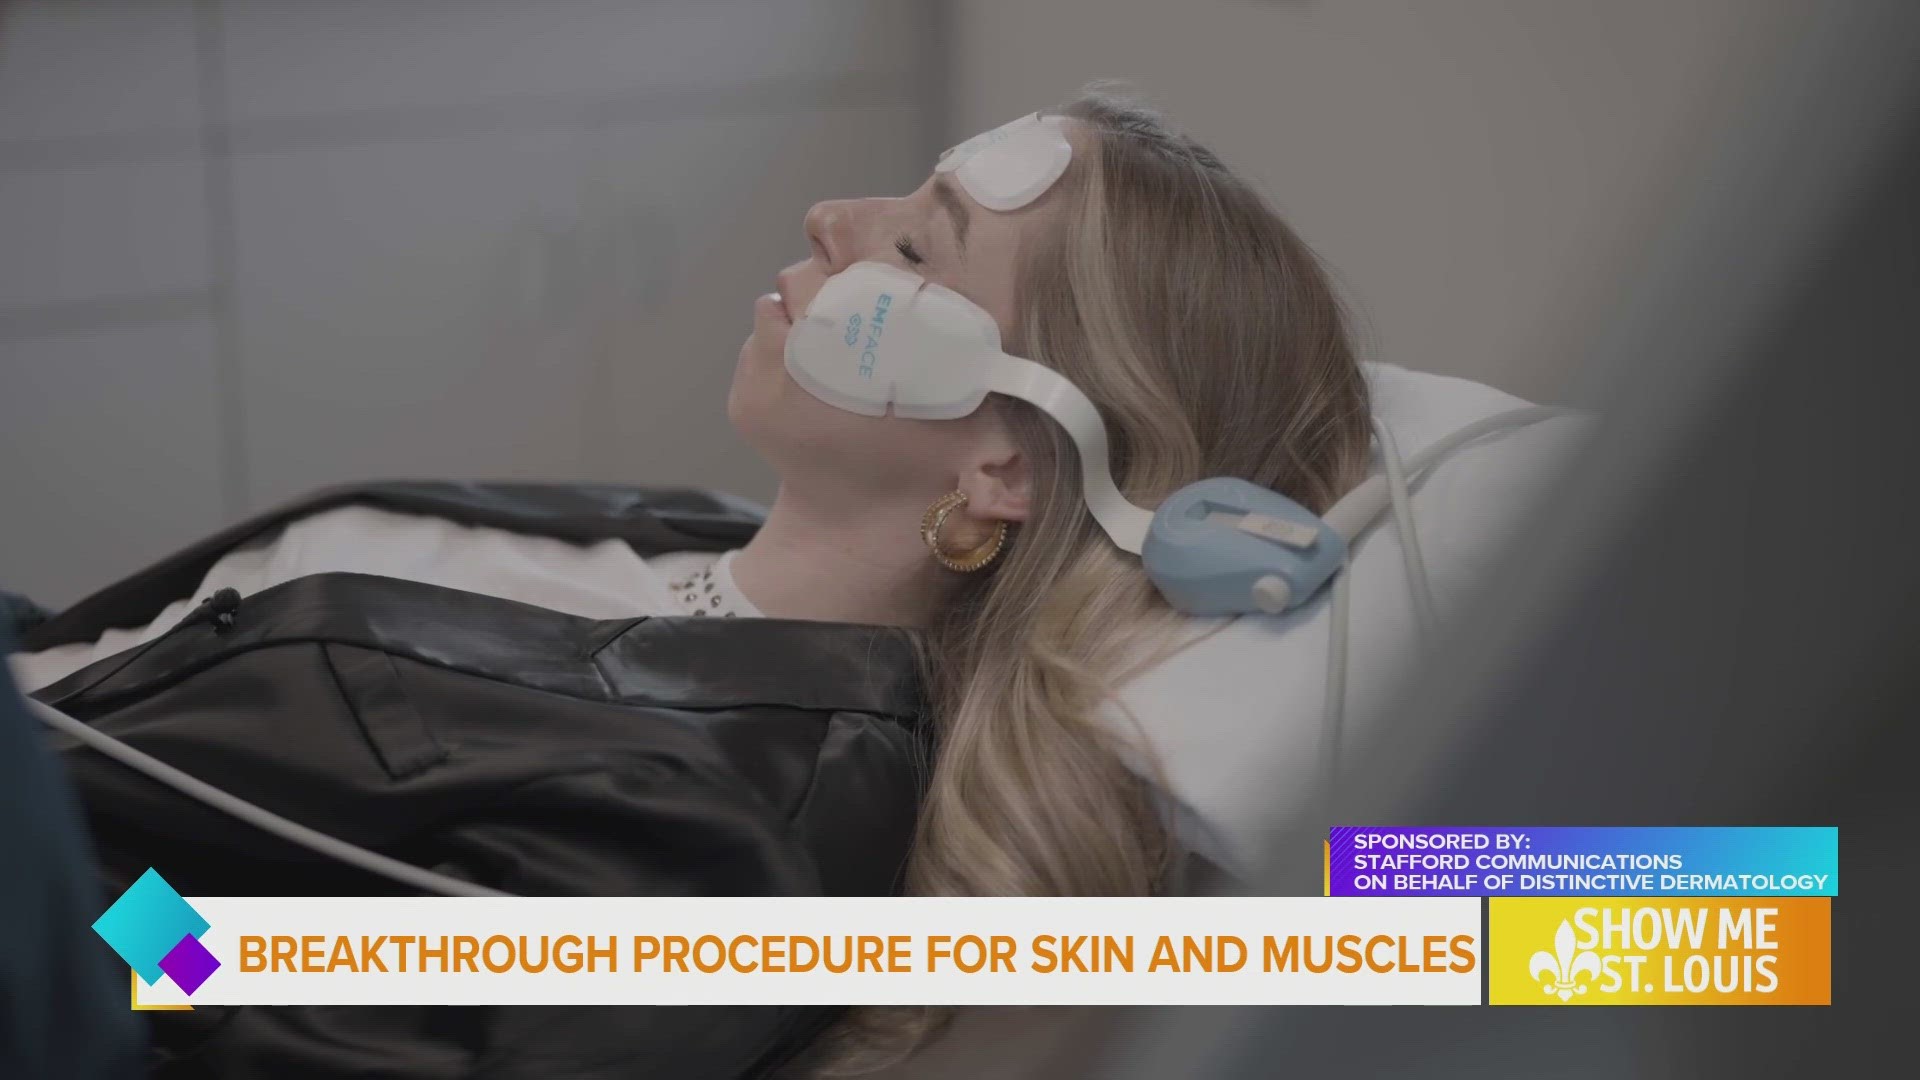 Backed by science, theses new therapies at Distinctive Dermatology are completely changing the cosmetic industry. Find healthy skin with no needles, no downtime.